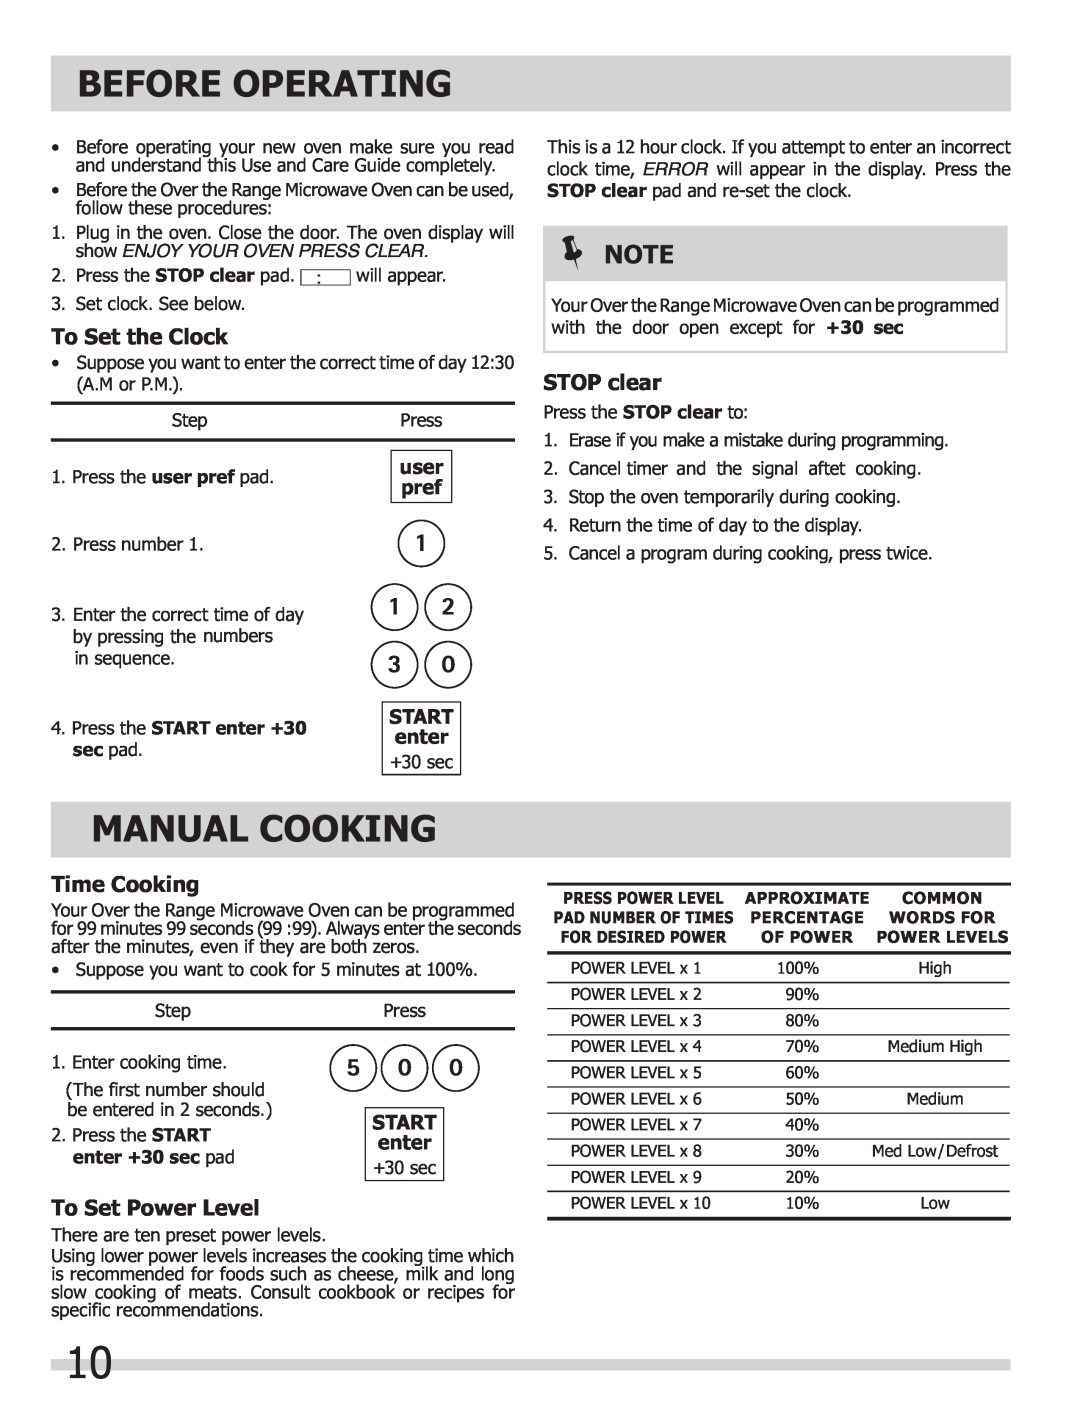 Frigidaire FGMV154CLF Before Operating, Manual Cooking, To Set the Clock, STOP clear, Time Cooking, To Set Power Level 